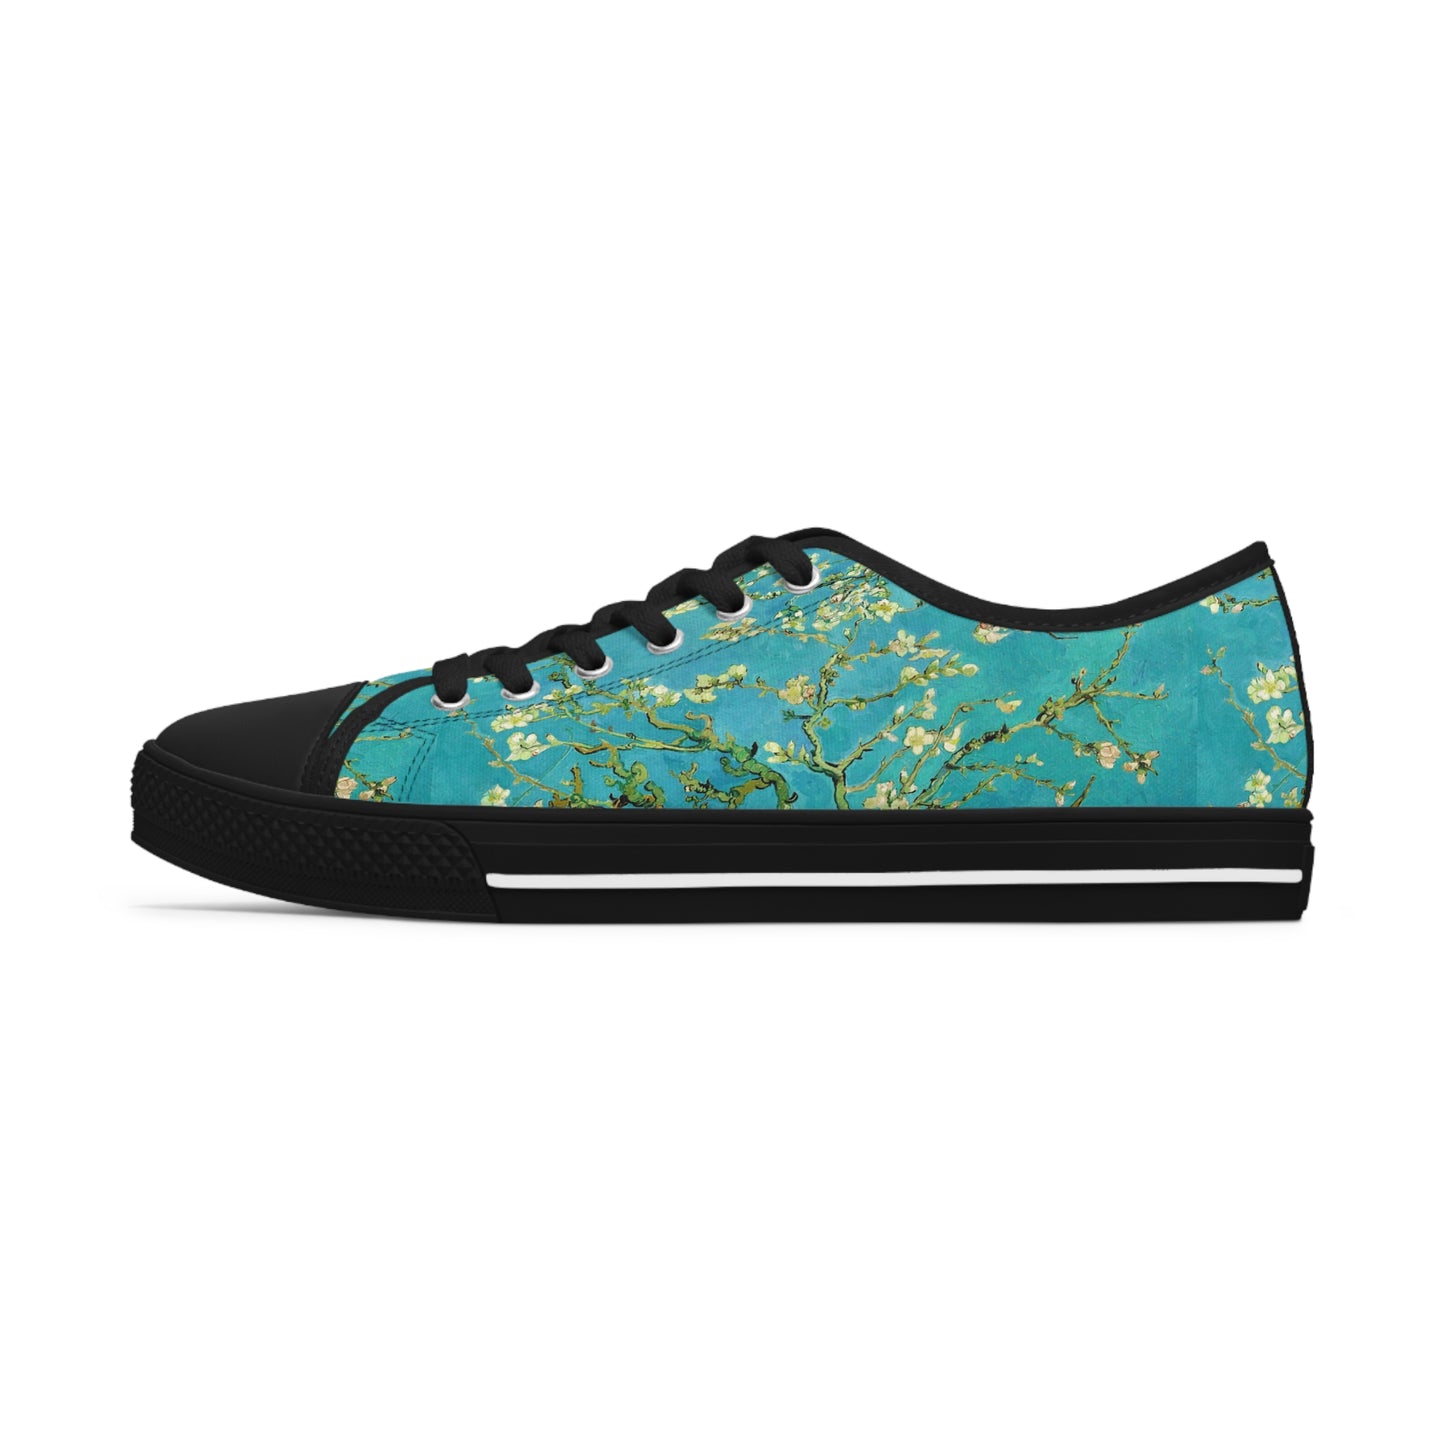 VINCENT VAN GOGH - ALMOND BLOSSOMS - LOW TOP ART SNEAKERS FOR HER